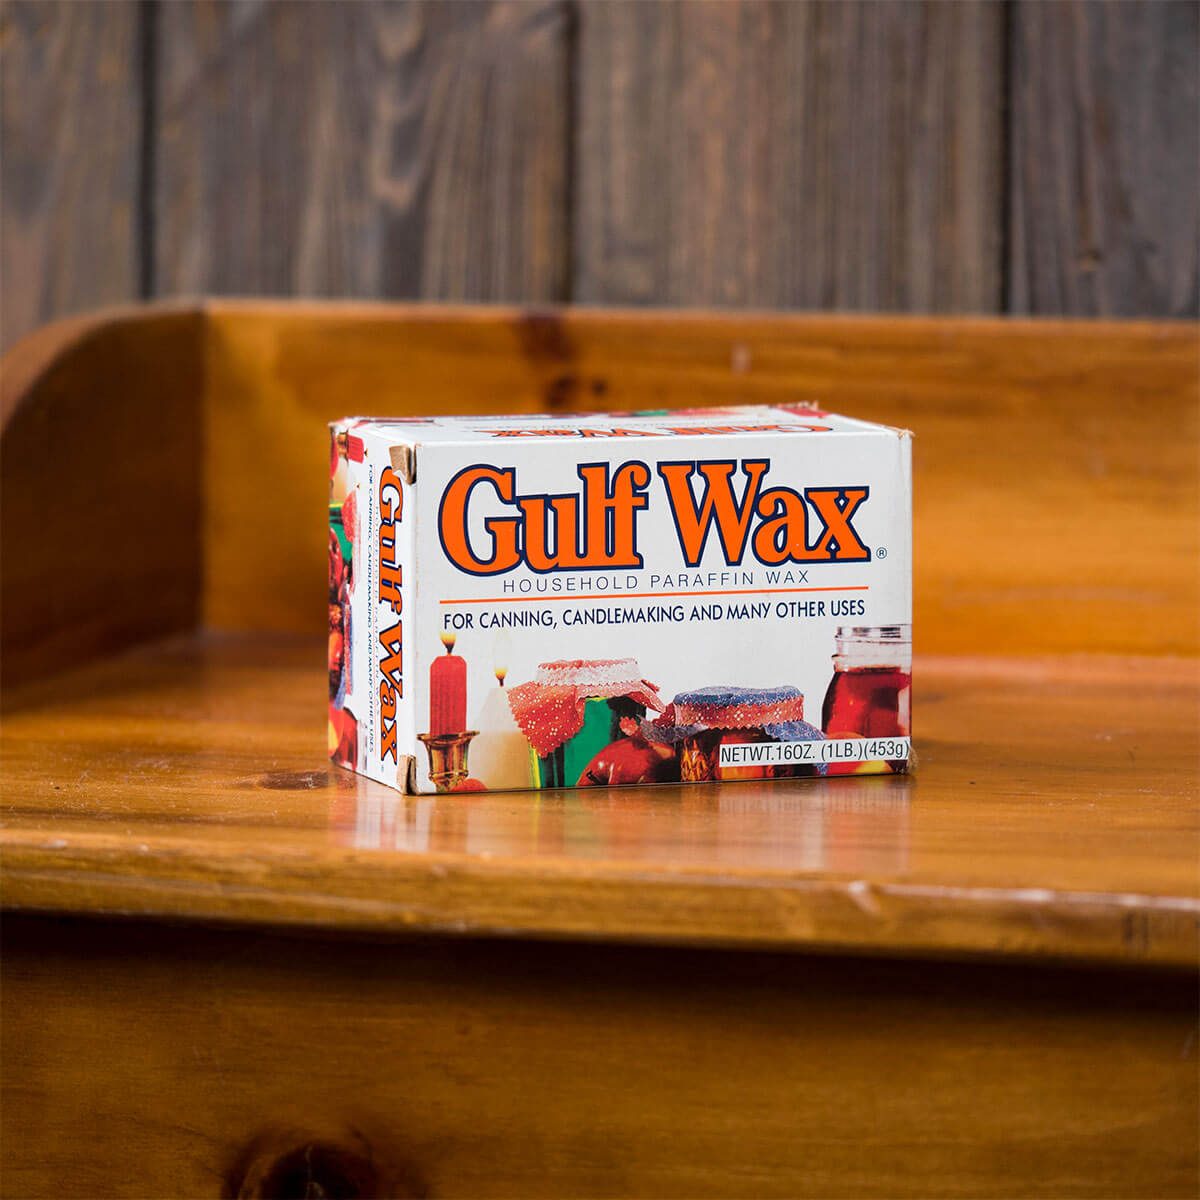 Gulf Wax to use for sticky wooden drawers